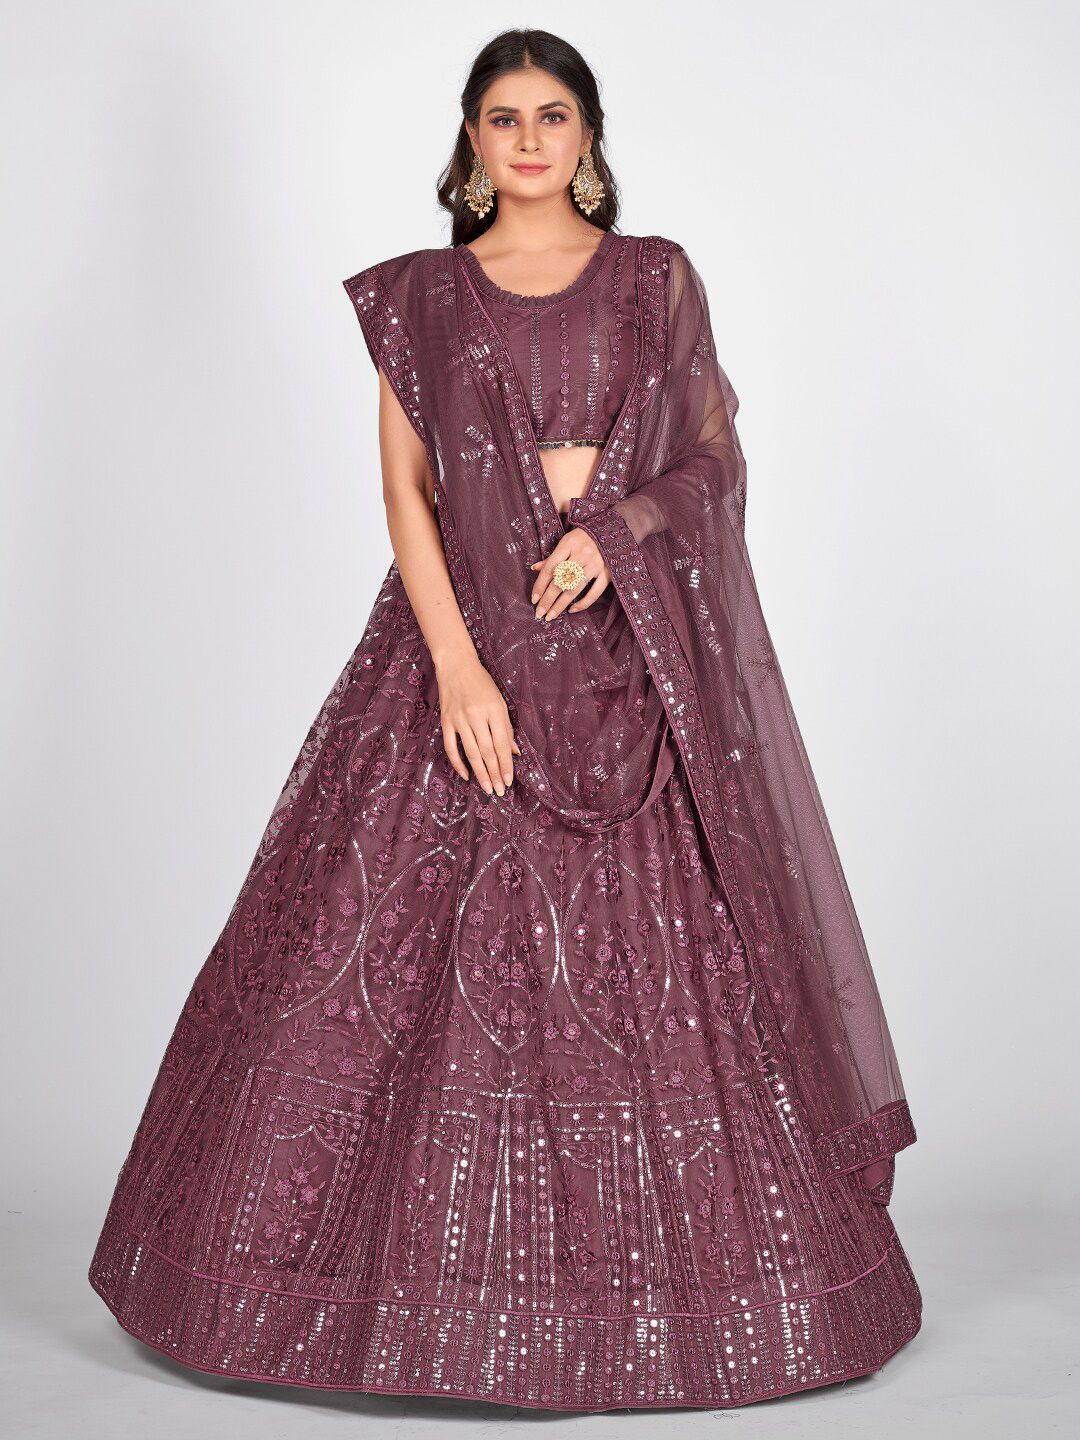 SHOPGARB Burgundy & Steel Semi-Stitched Lehenga & Unstitched Blouse With Dupatta Price in India